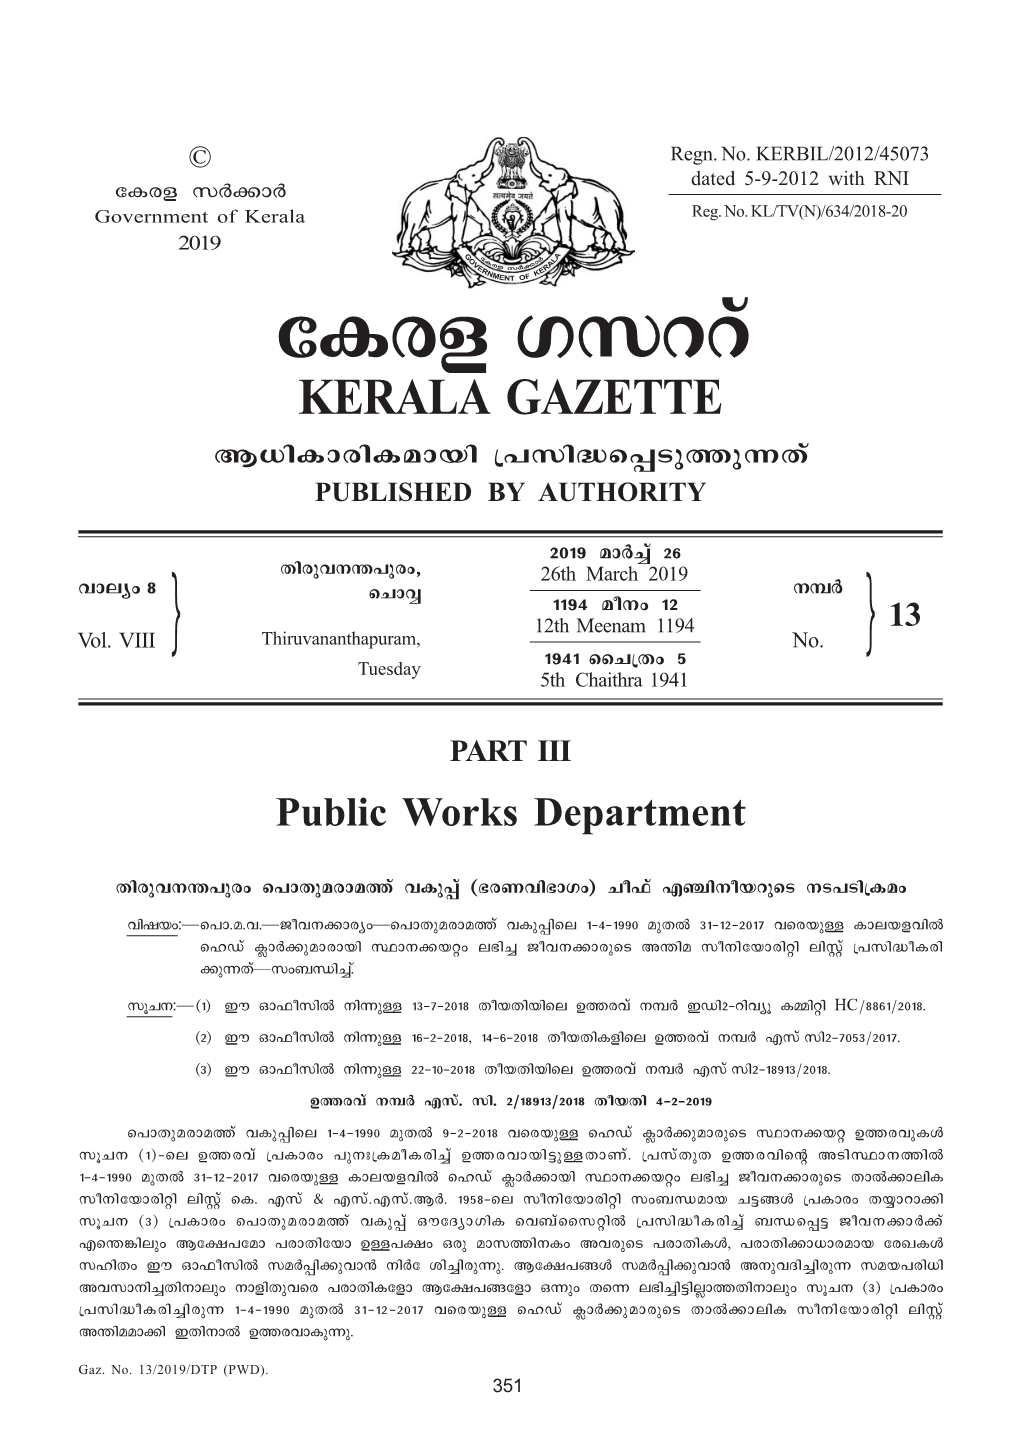 Final Seniority List of Head Clerks in Public Works Department from 1-4-1990 to 31-12-2017